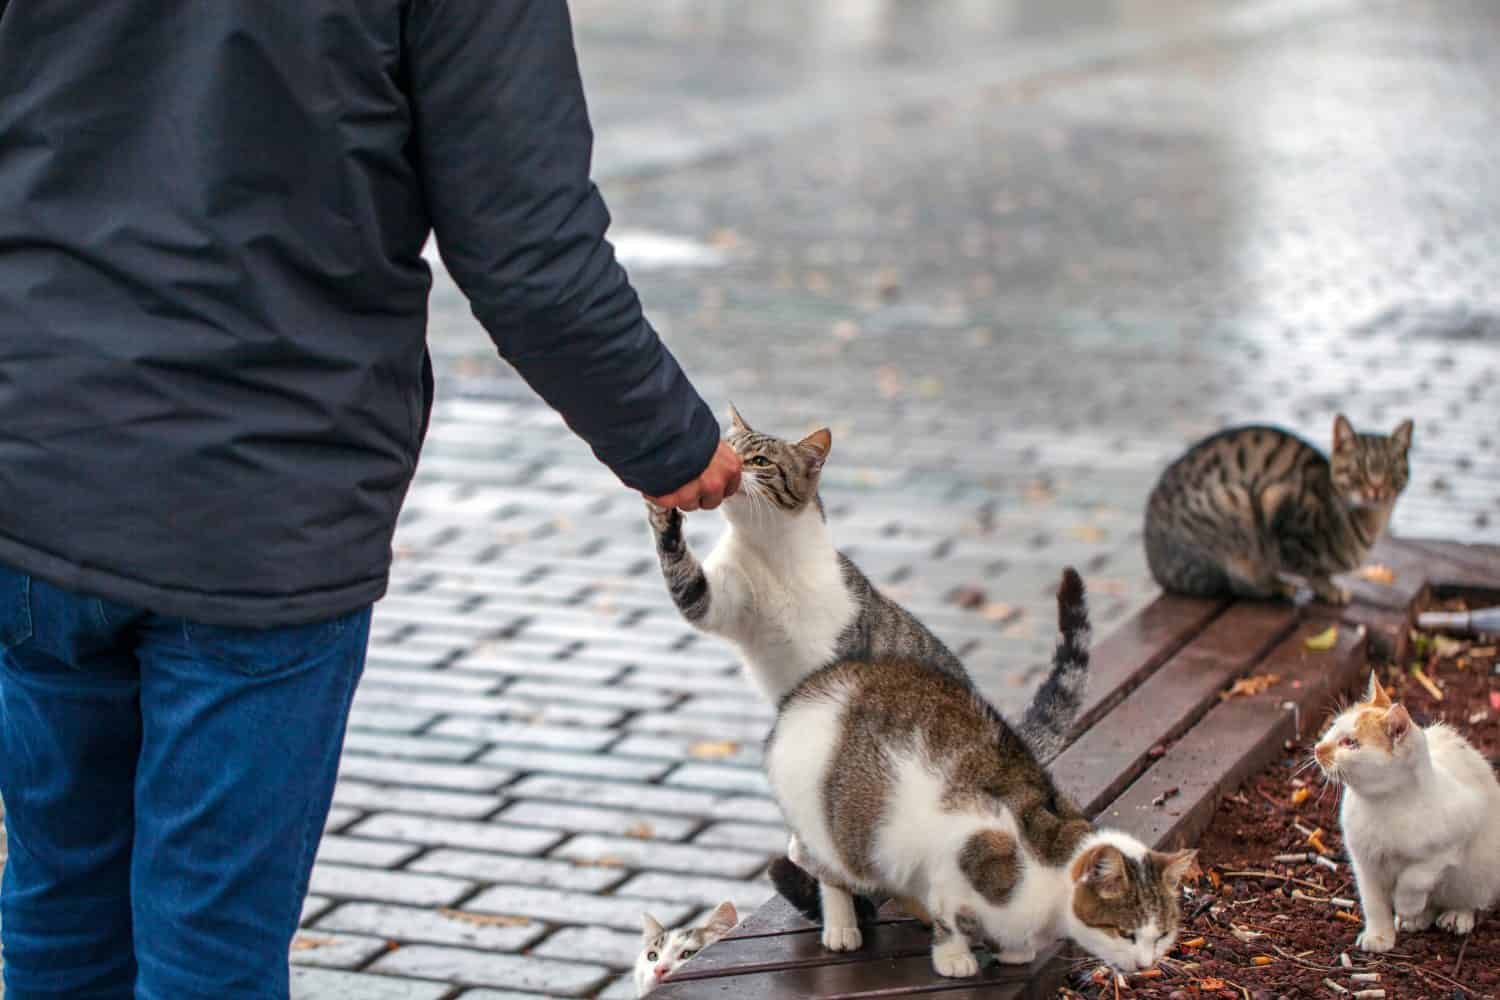 A man feeds stray cats, People feed kittens sausages. Problem of street animals. Cats live on street.